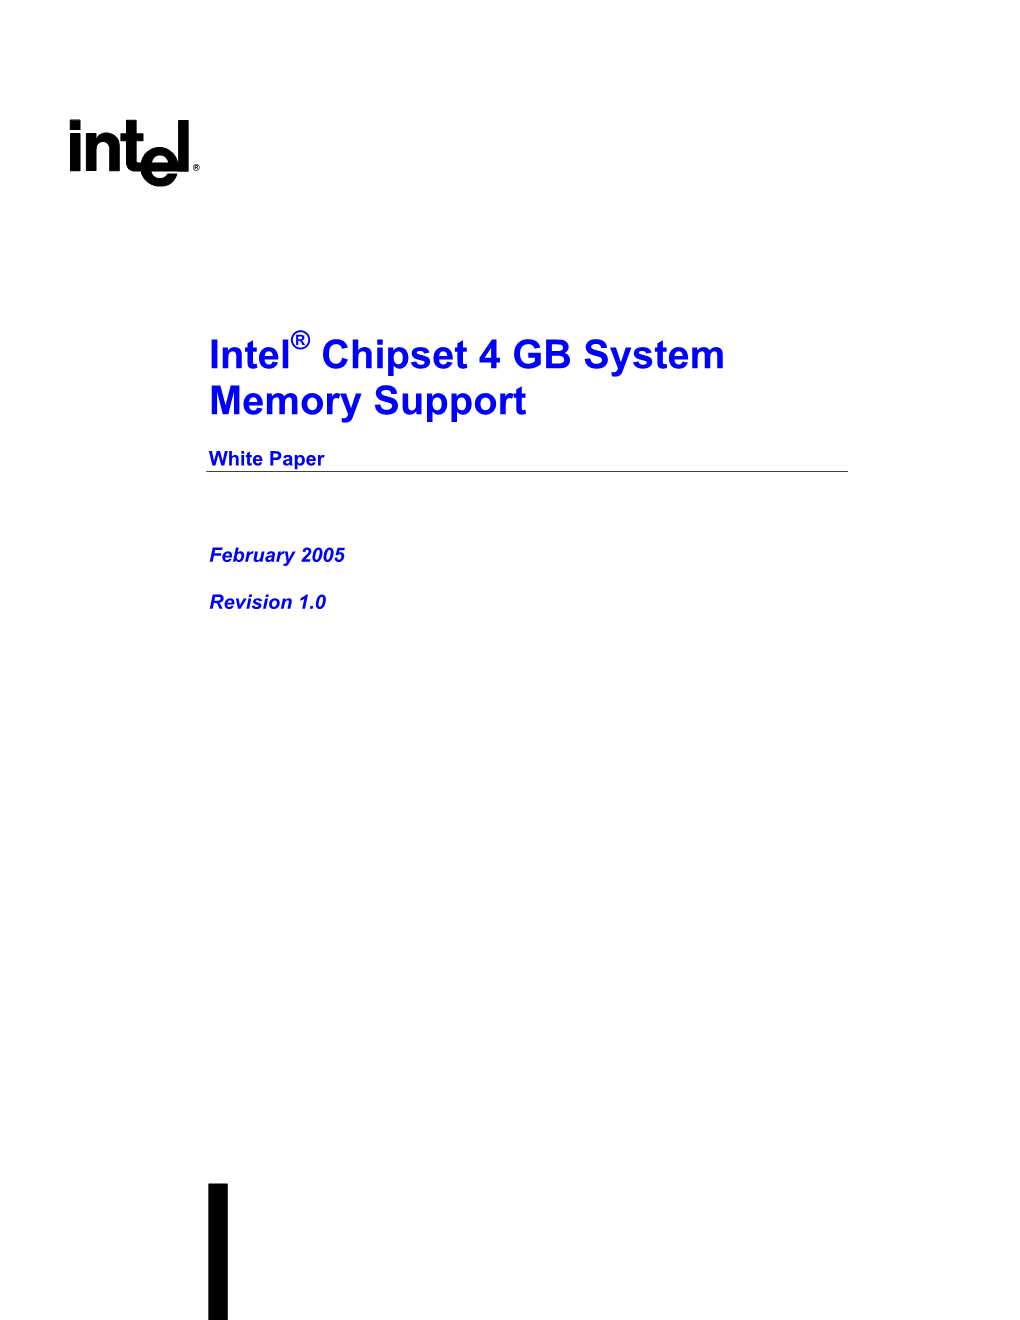 Intel(R) Chipset 4 GB System Memory Support White Paper